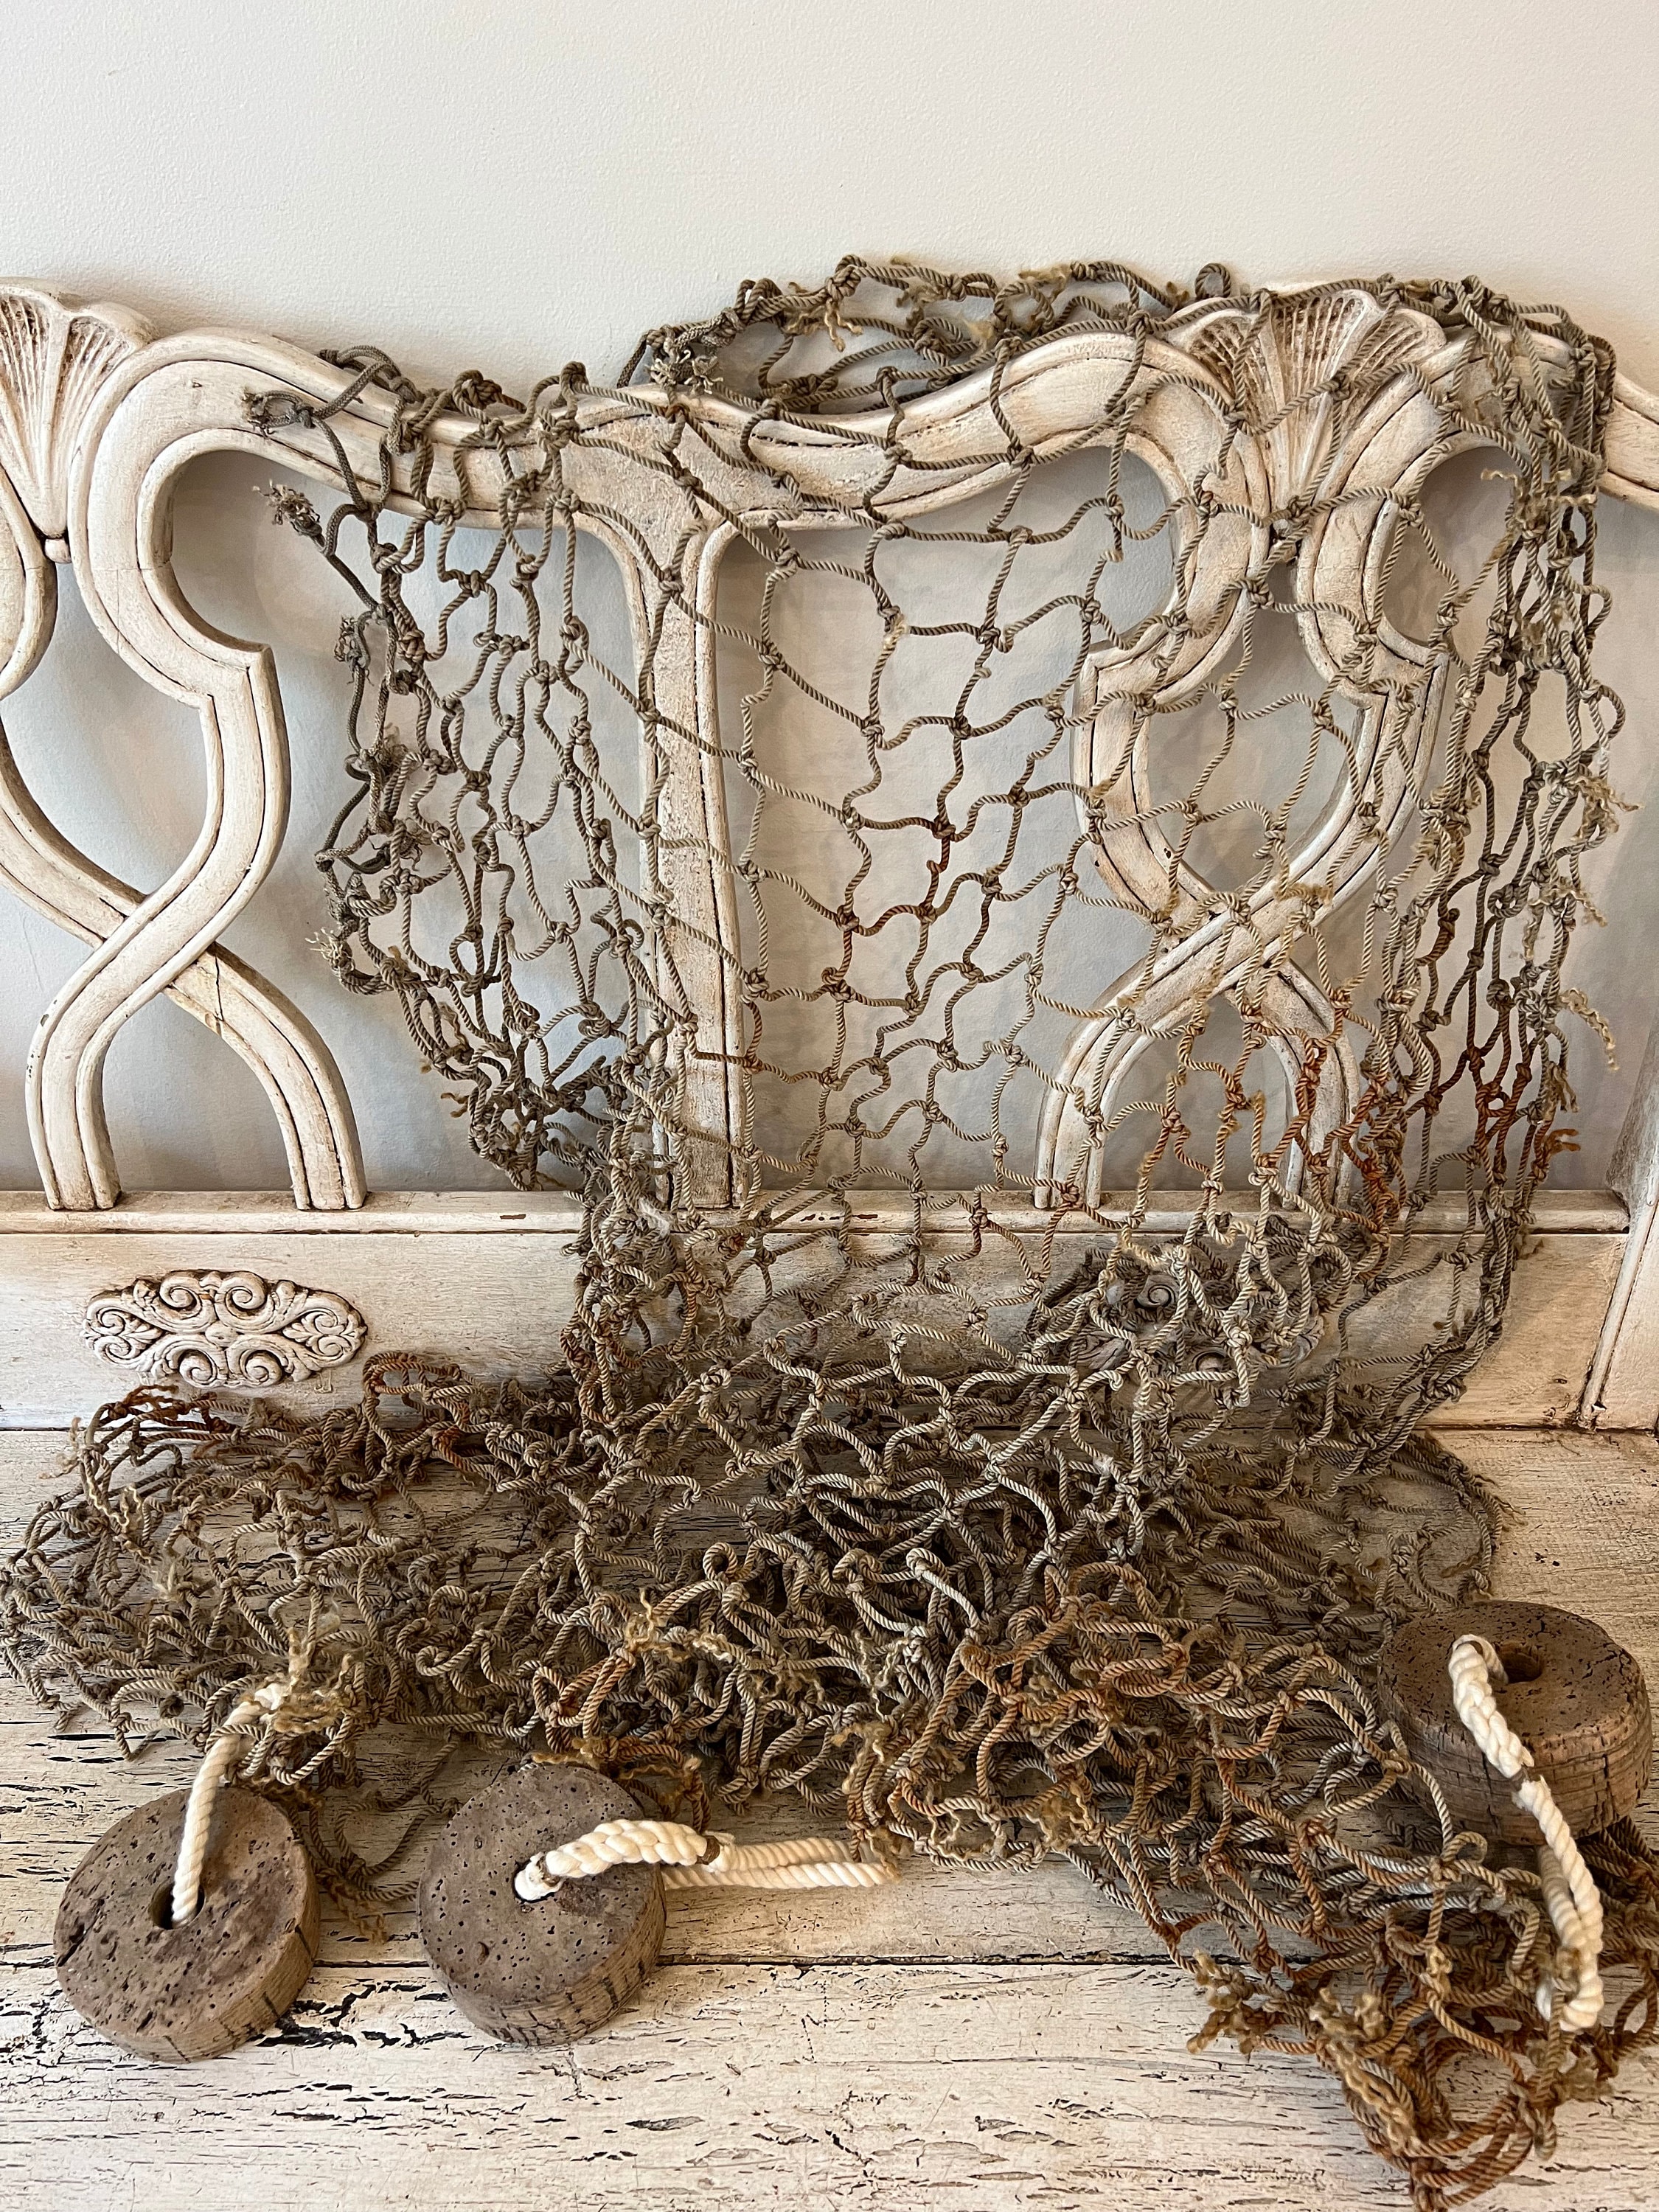 Vintage Fishing Net With Cork Floats Rustic Knotted Rope Net 4 X 4  Authentic, Weathered -  Canada